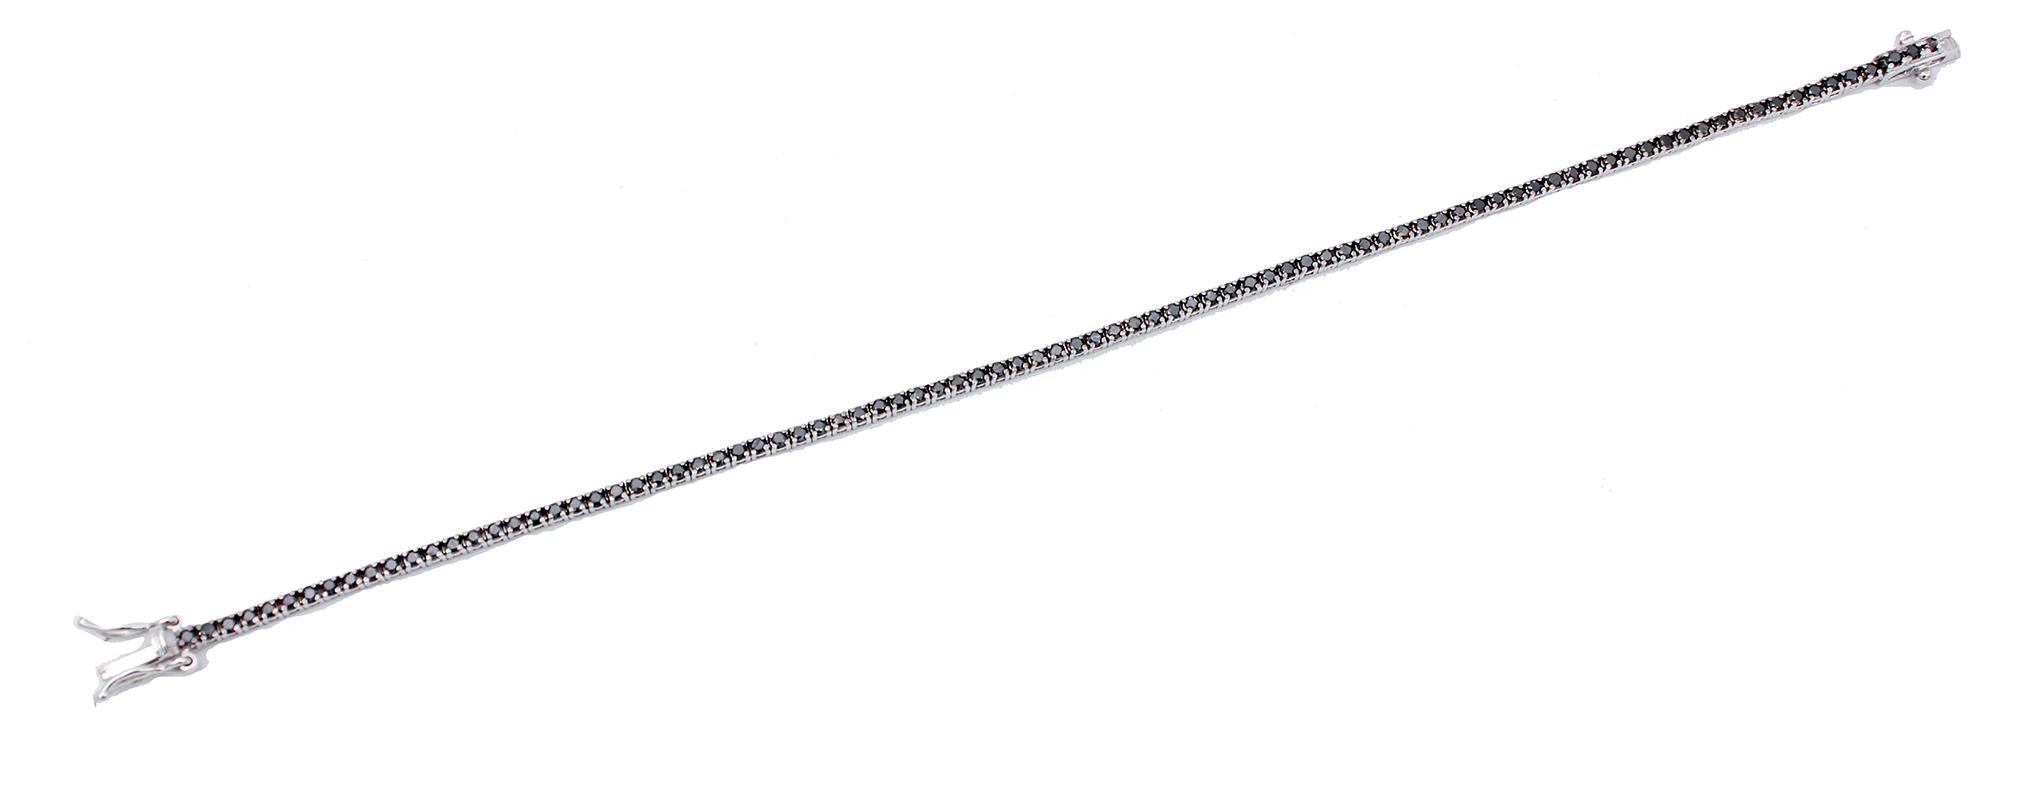 Simple tennis bracelet in 9 karat white gold structure mounted with black diamonds.
This bracelet is totally handmade by Italian master goldsmiths and it is in perfect condition.
Diamonds 1.72 ct
Total Weight 6.10 gr
Lenght 18.5 cm
RF  +GOOH
For any